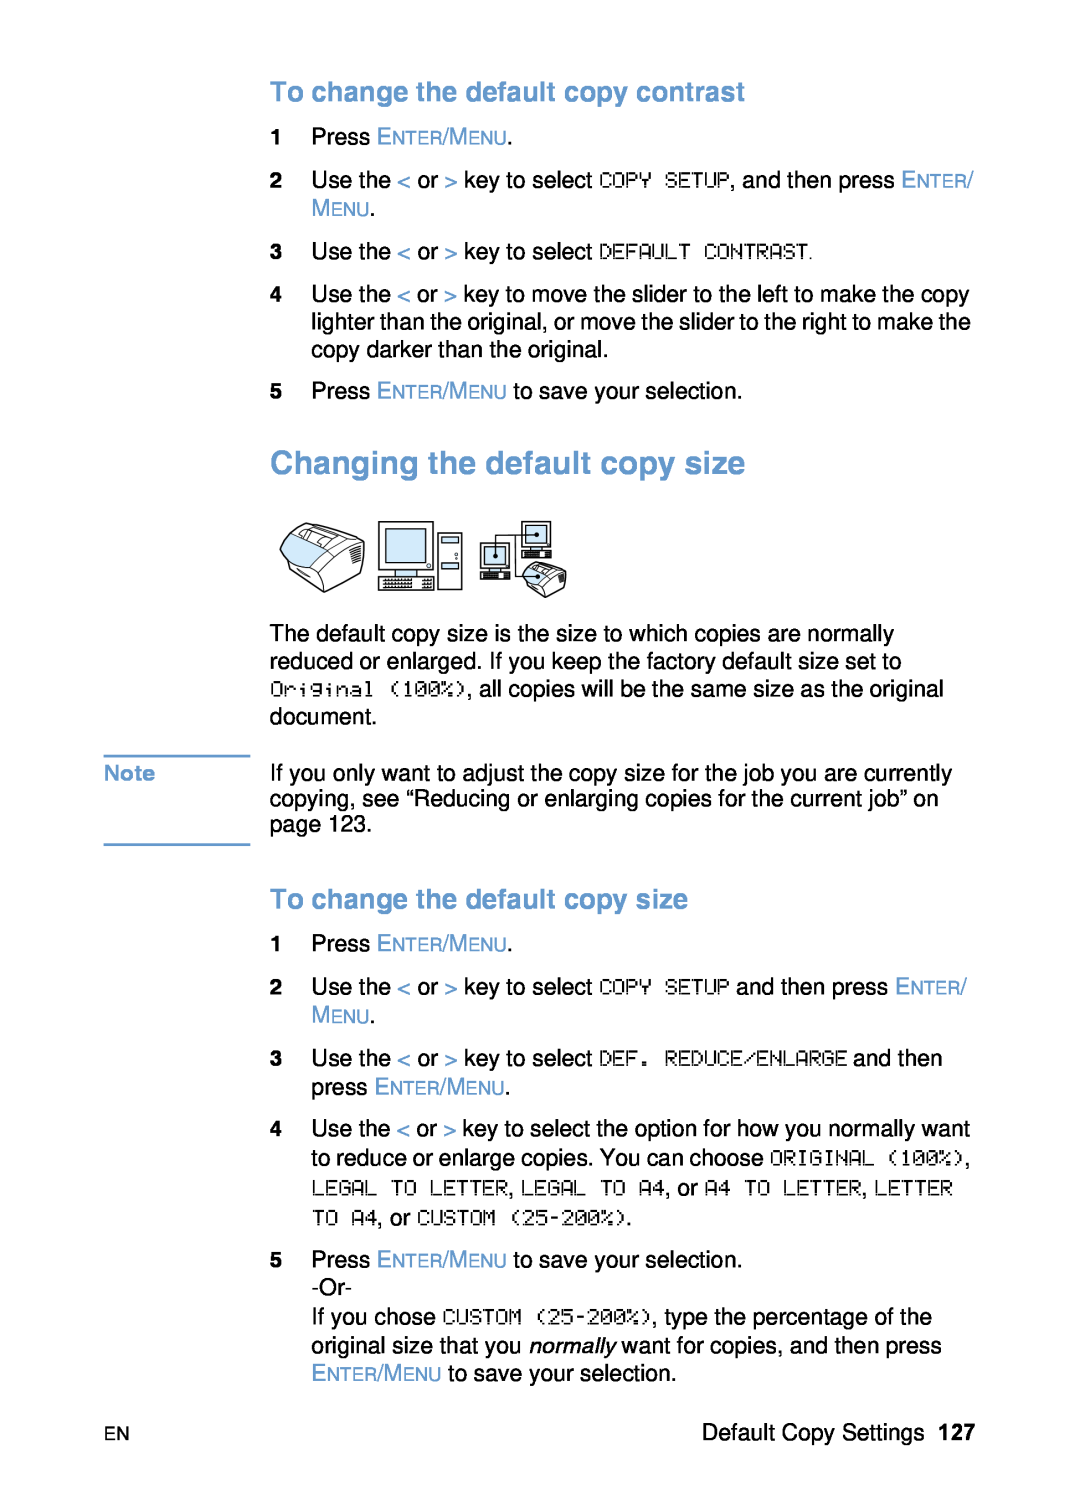 HP 3200 manual Changing the default copy size, To change the default copy contrast, To change the default copy size 